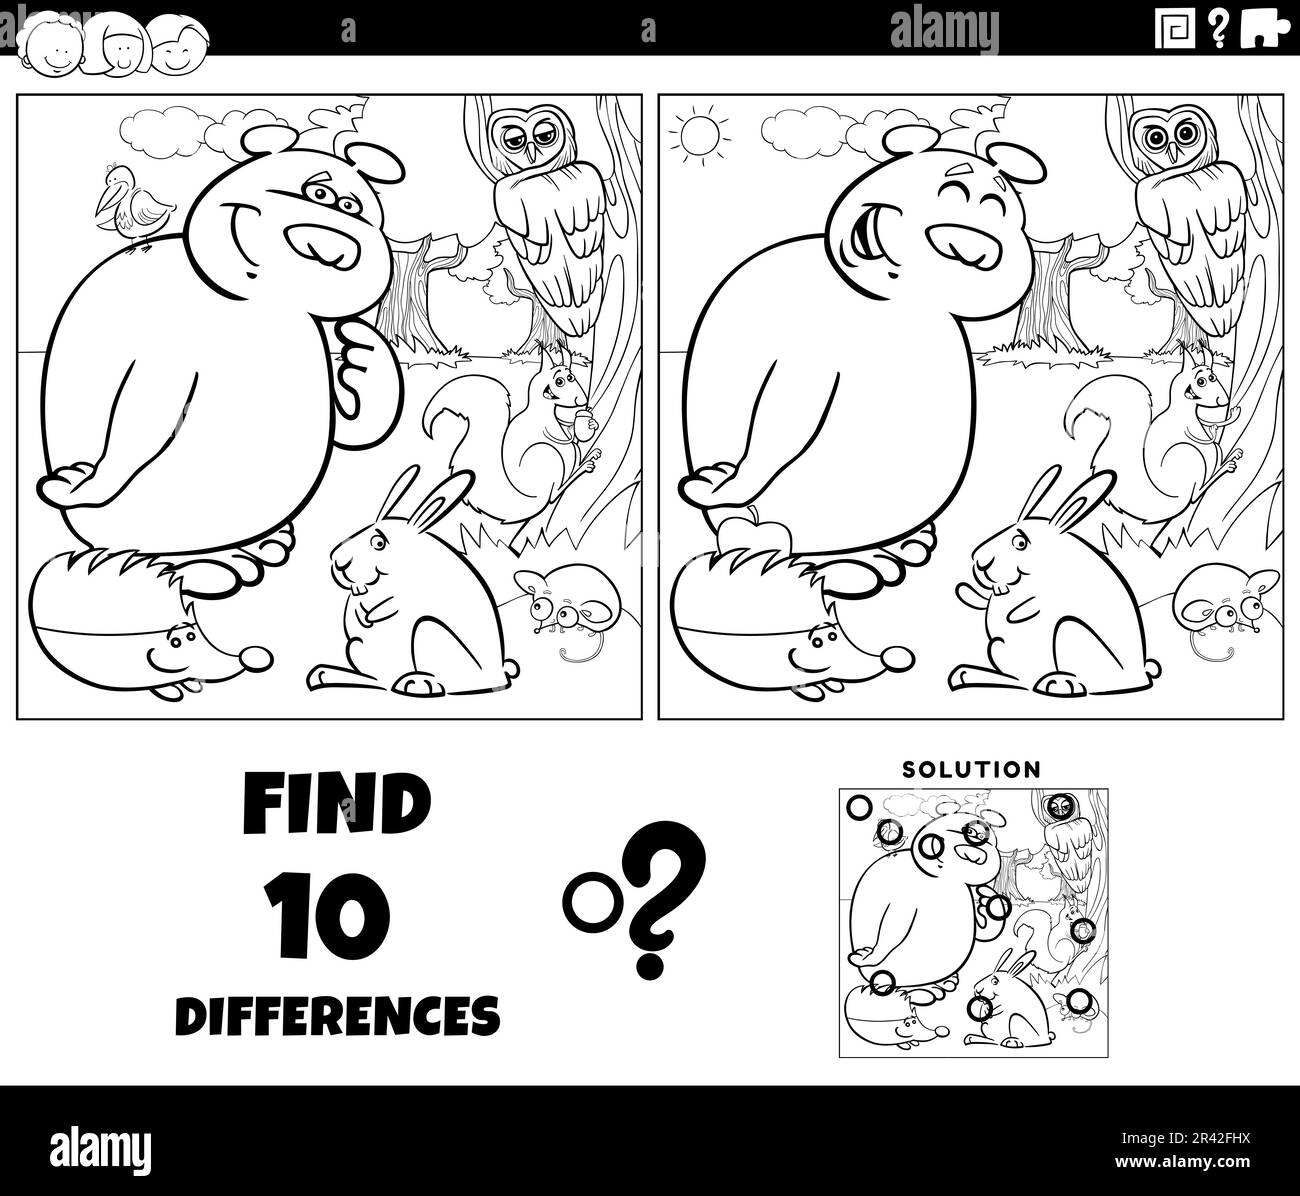 Differences game with cartoon animals coloring page Stock Photo